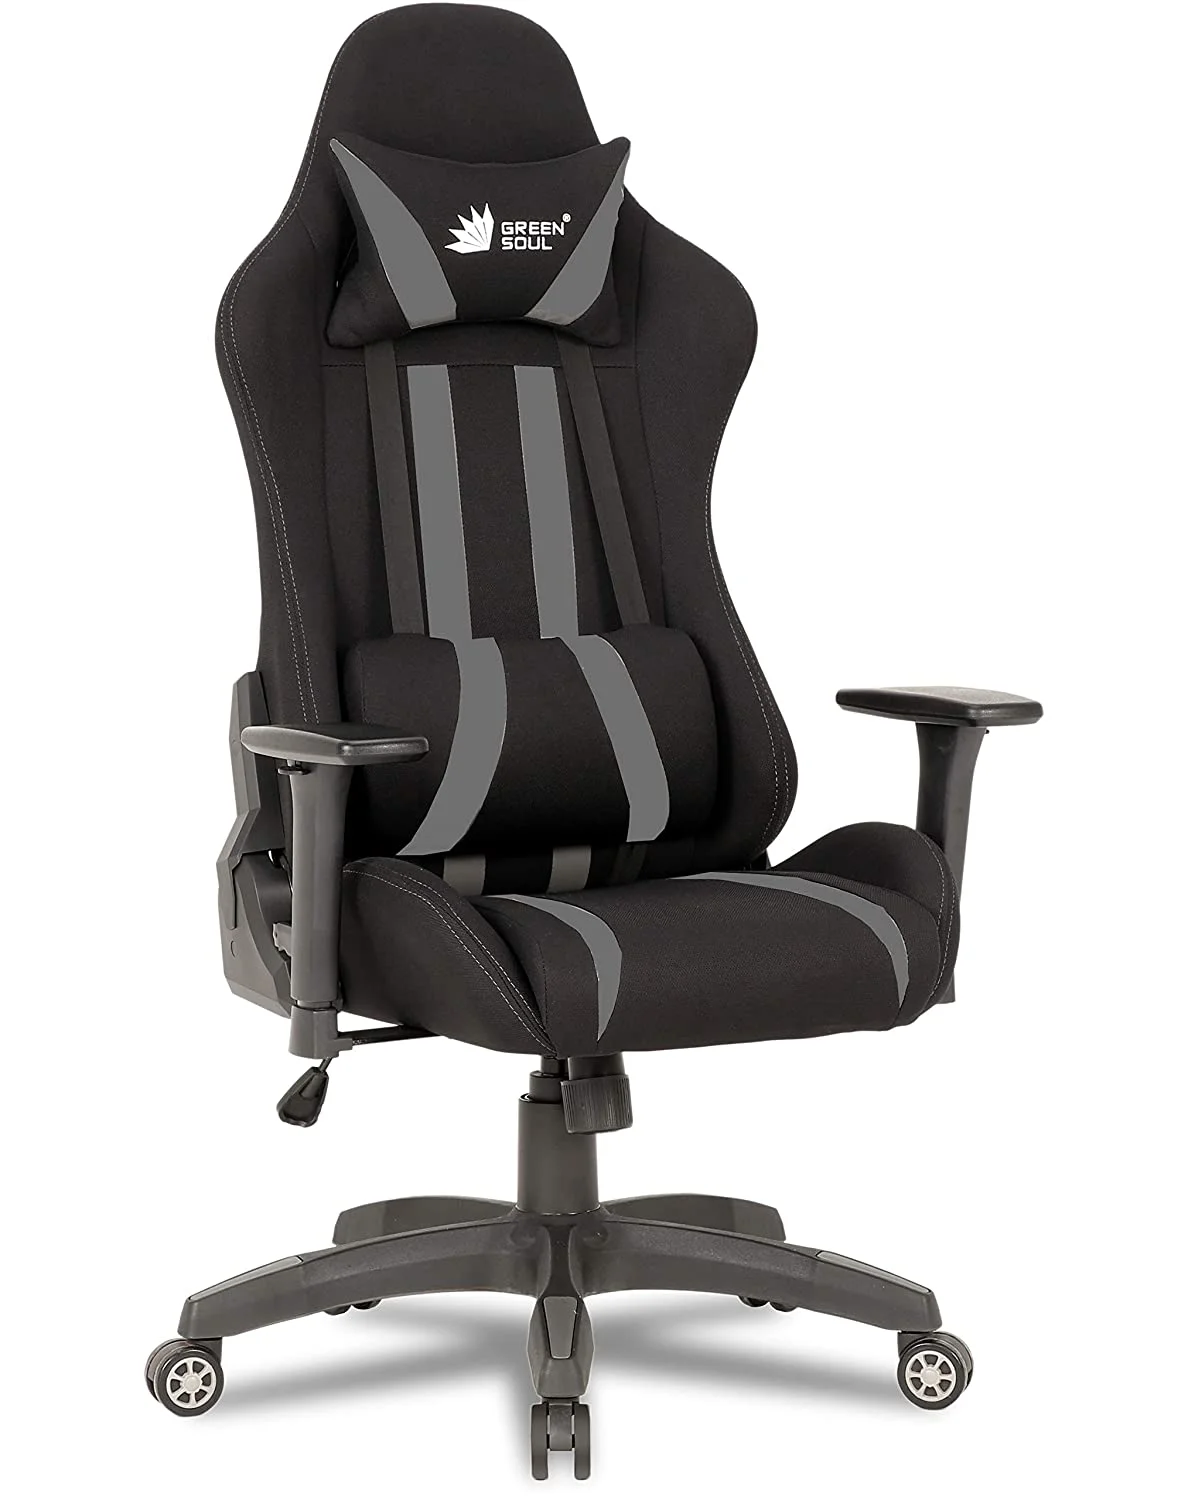 Green Soul Beast Gaming Chair Under 20000 Rs in India 2021